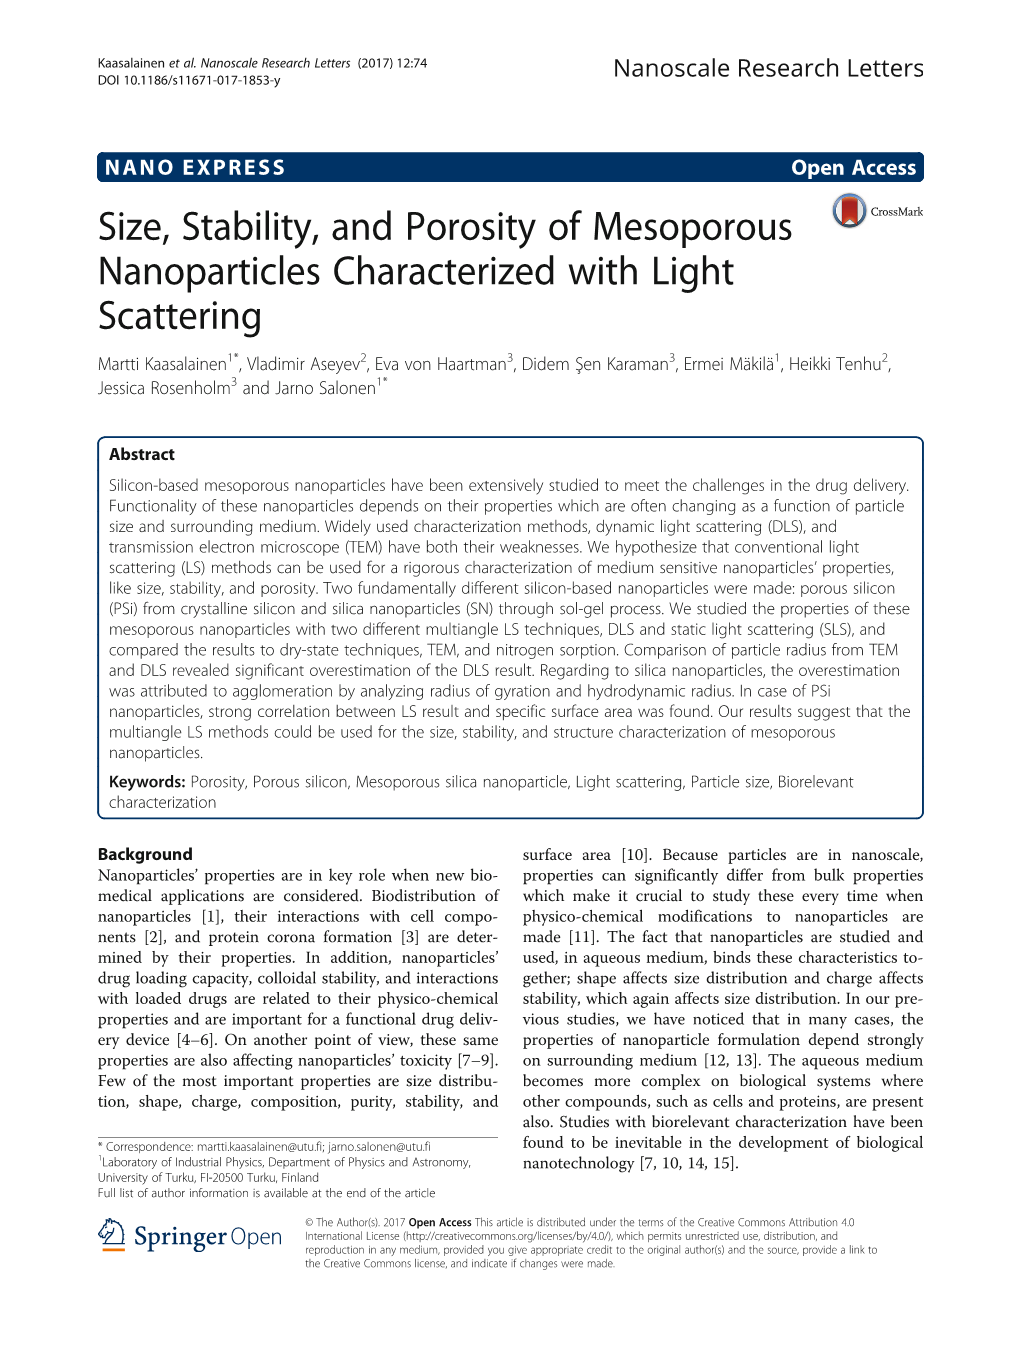 Size, Stability, and Porosity of Mesoporous Nanoparticles Characterized with Light Scattering